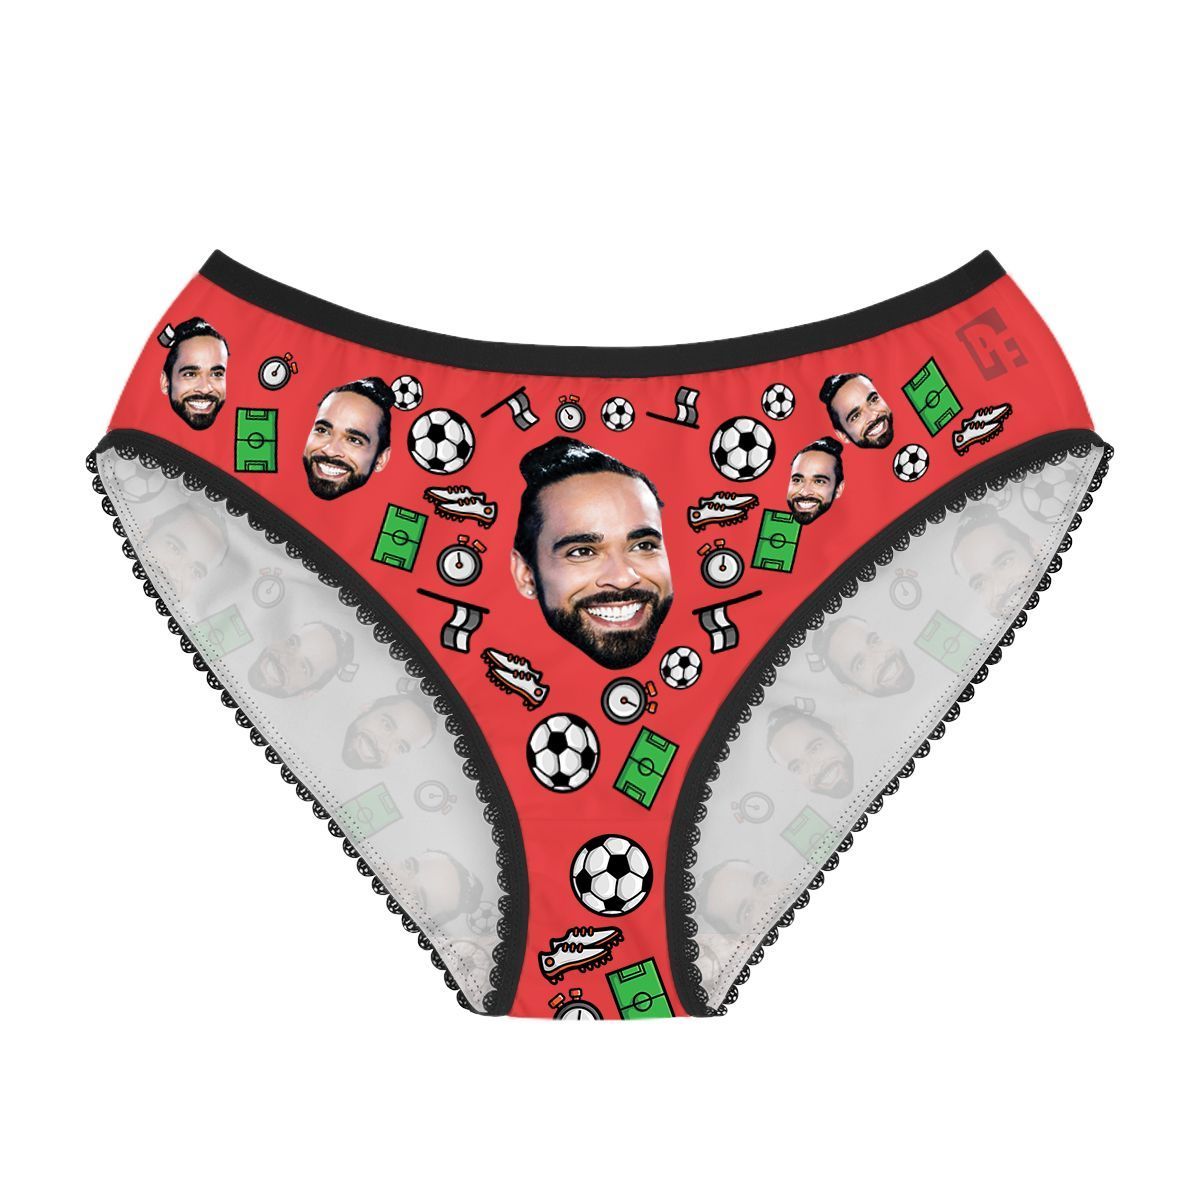 Red Football women's underwear briefs personalized with photo printed on them